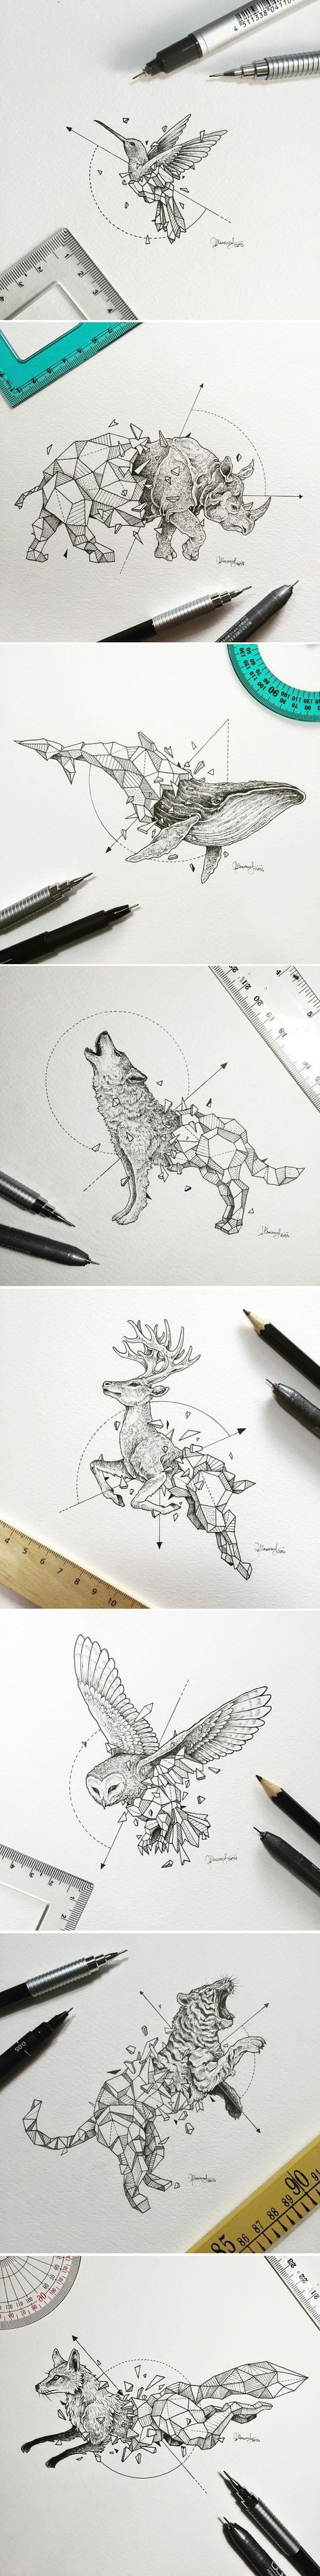 SCULPTING ANIMALS OUT OF GEOMETRY